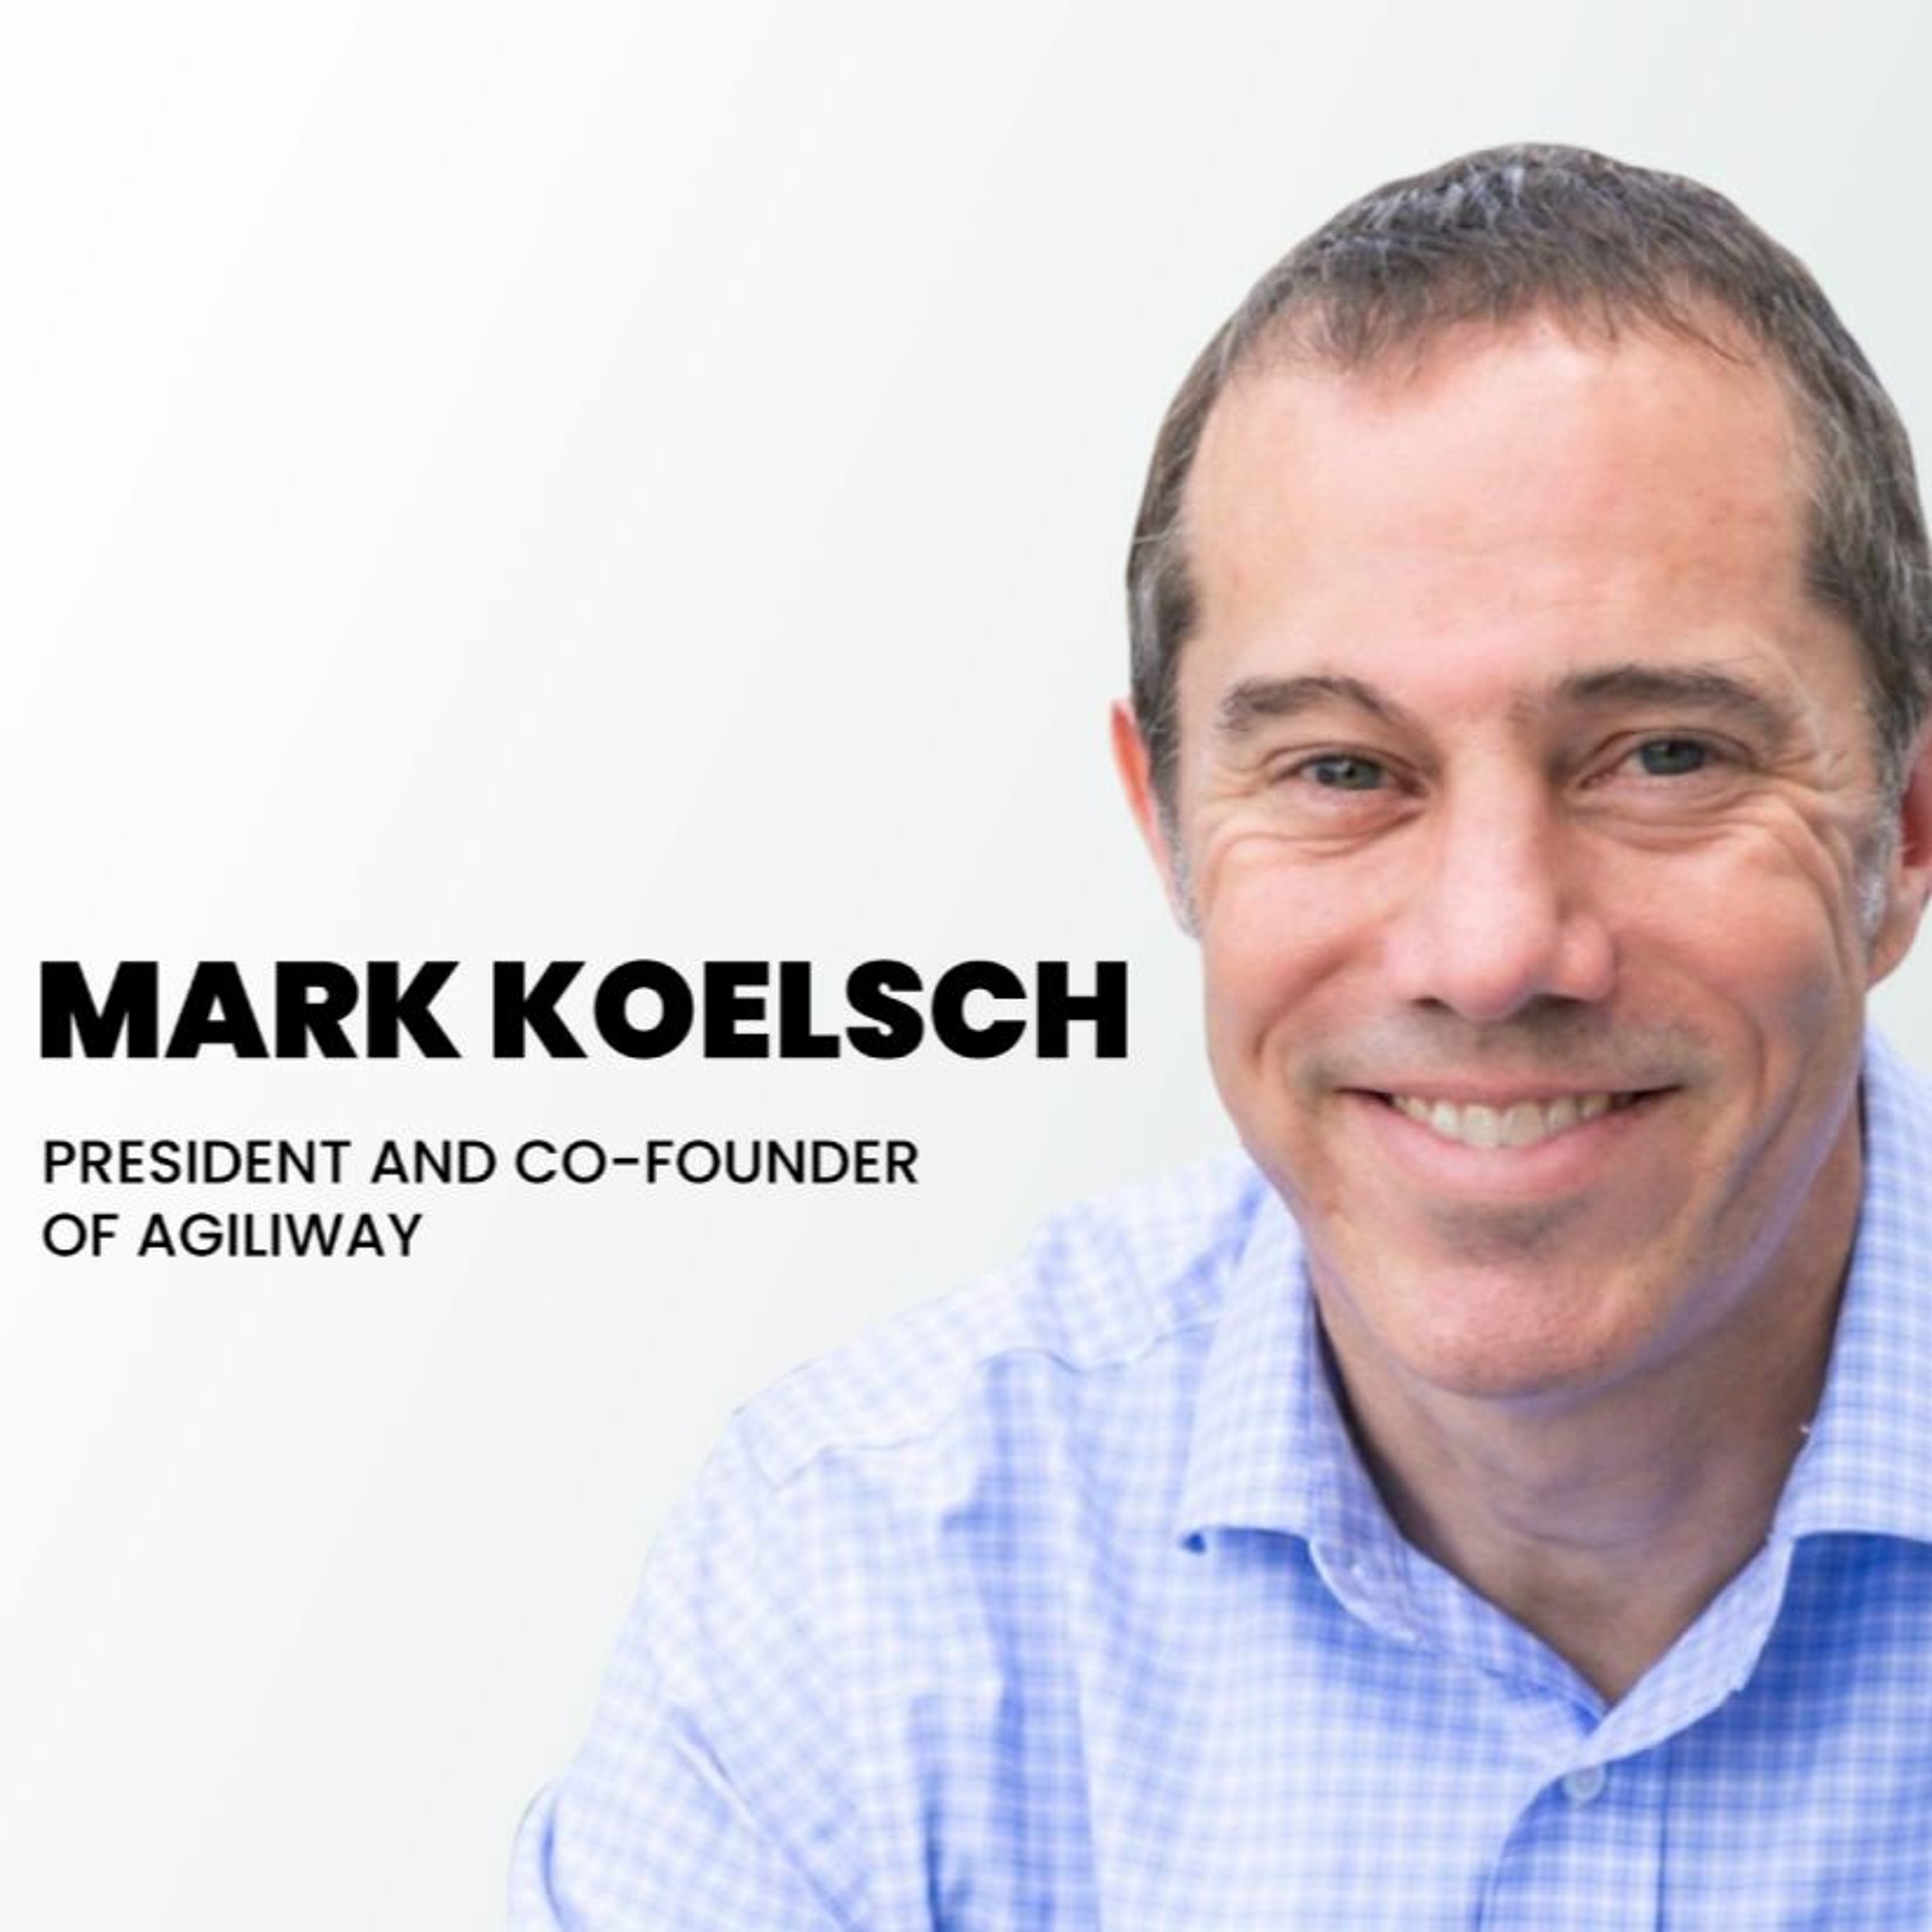 1. About like-minded business partners and success in IT - with Mark Koelsch